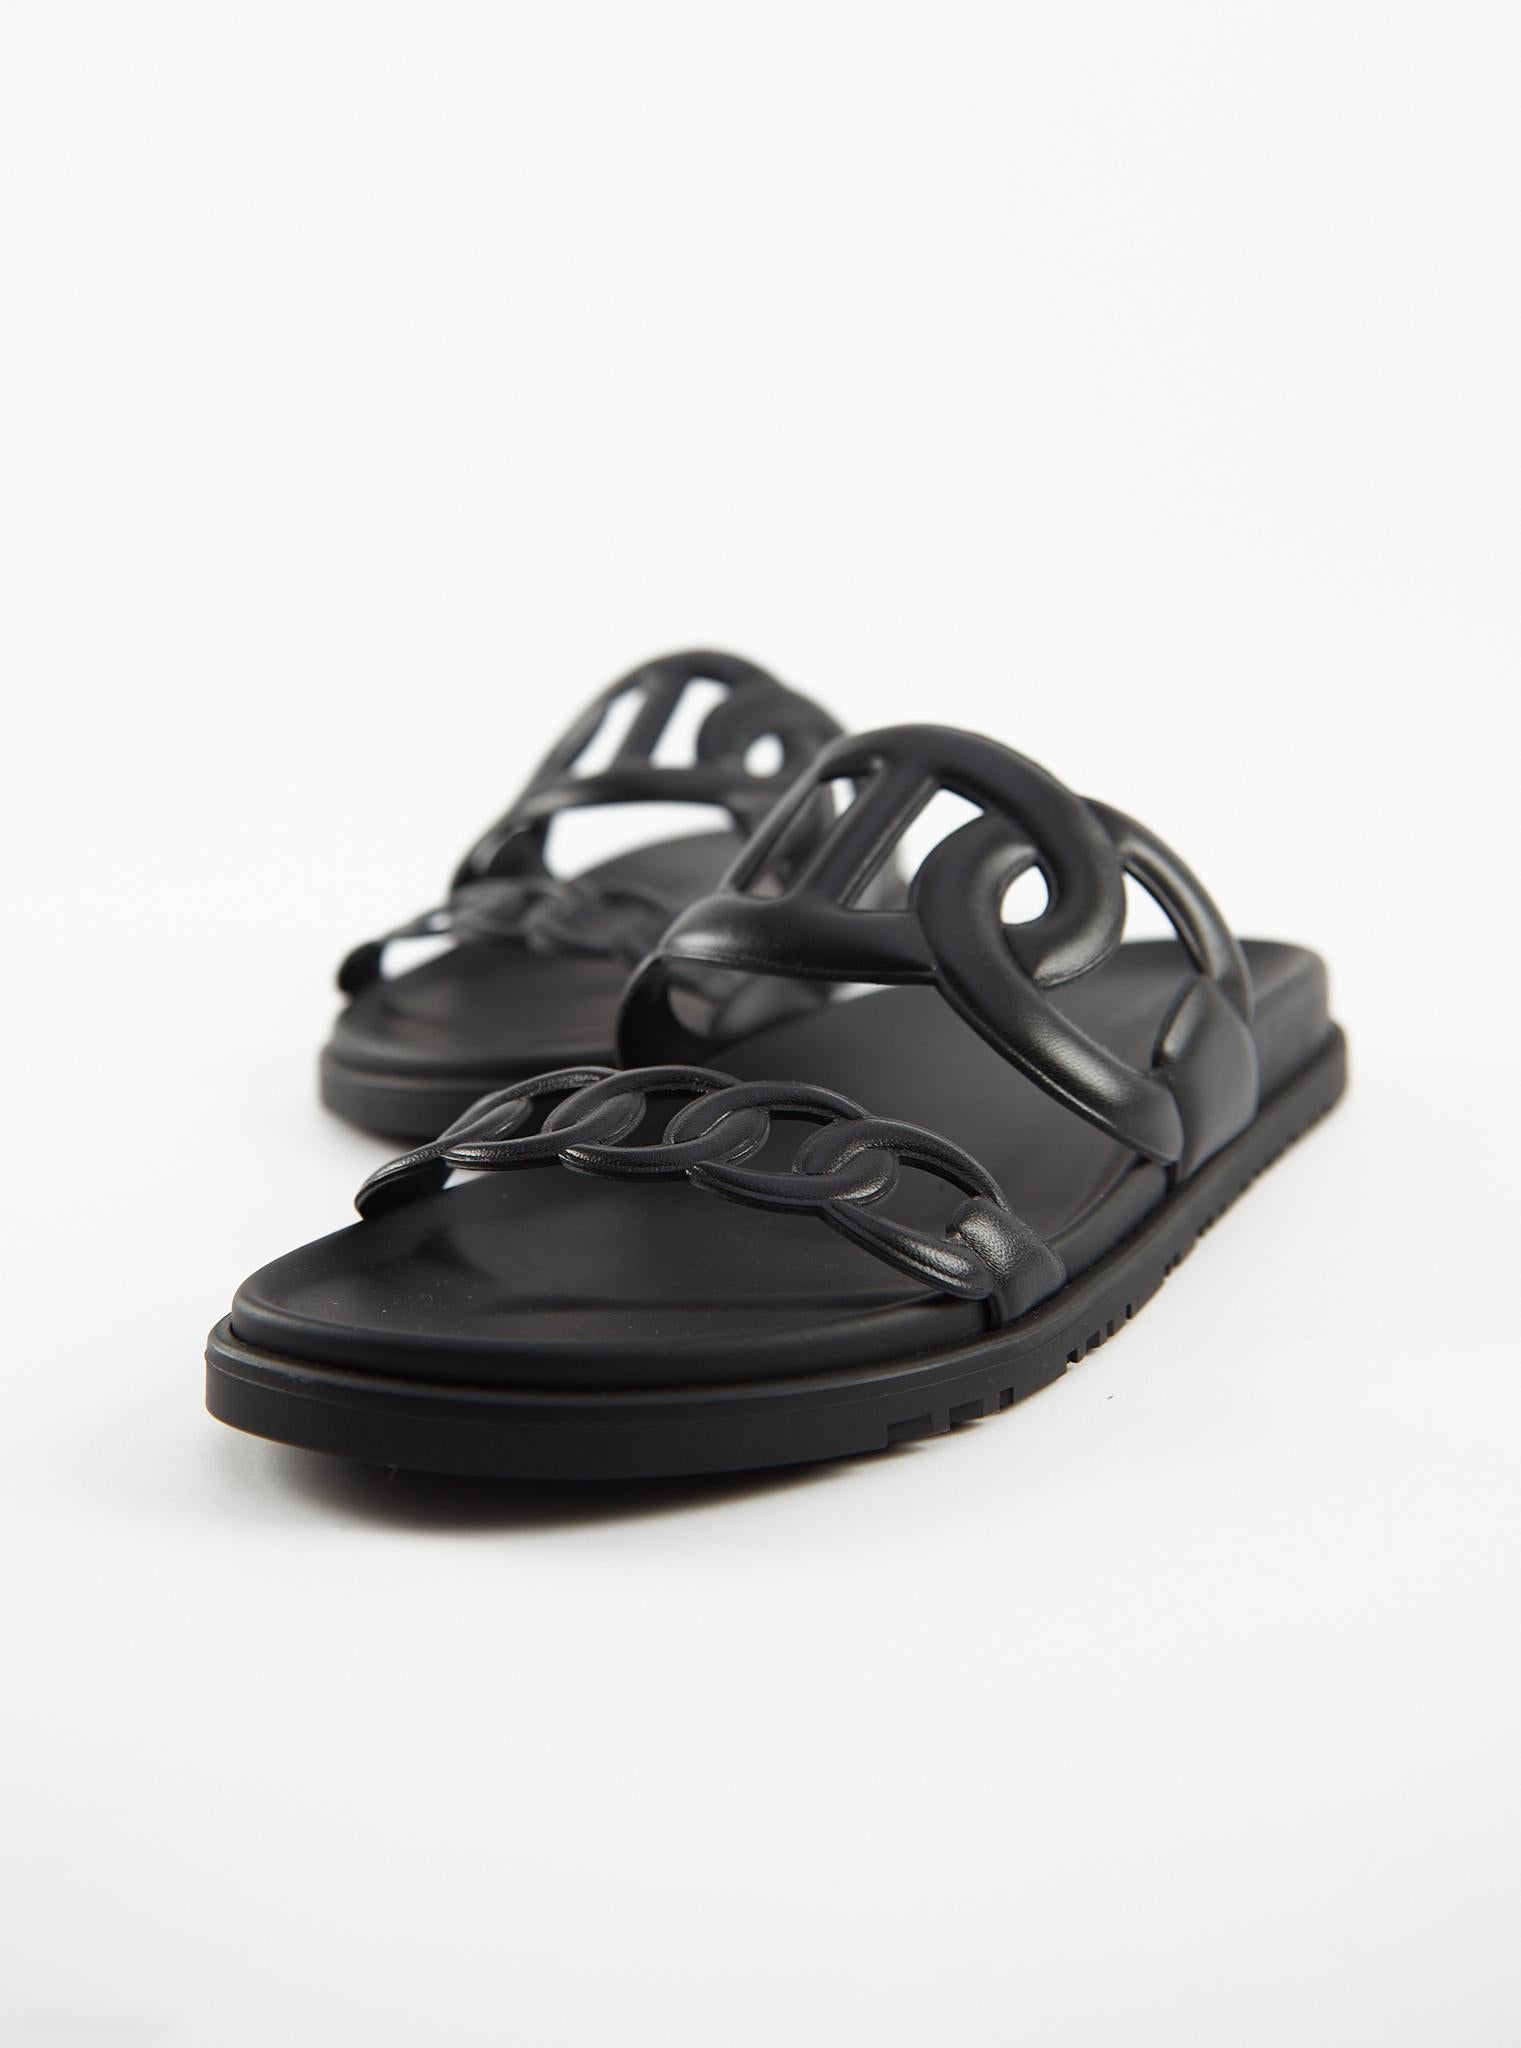 Hermès Extra Sandal in Calfskin with 